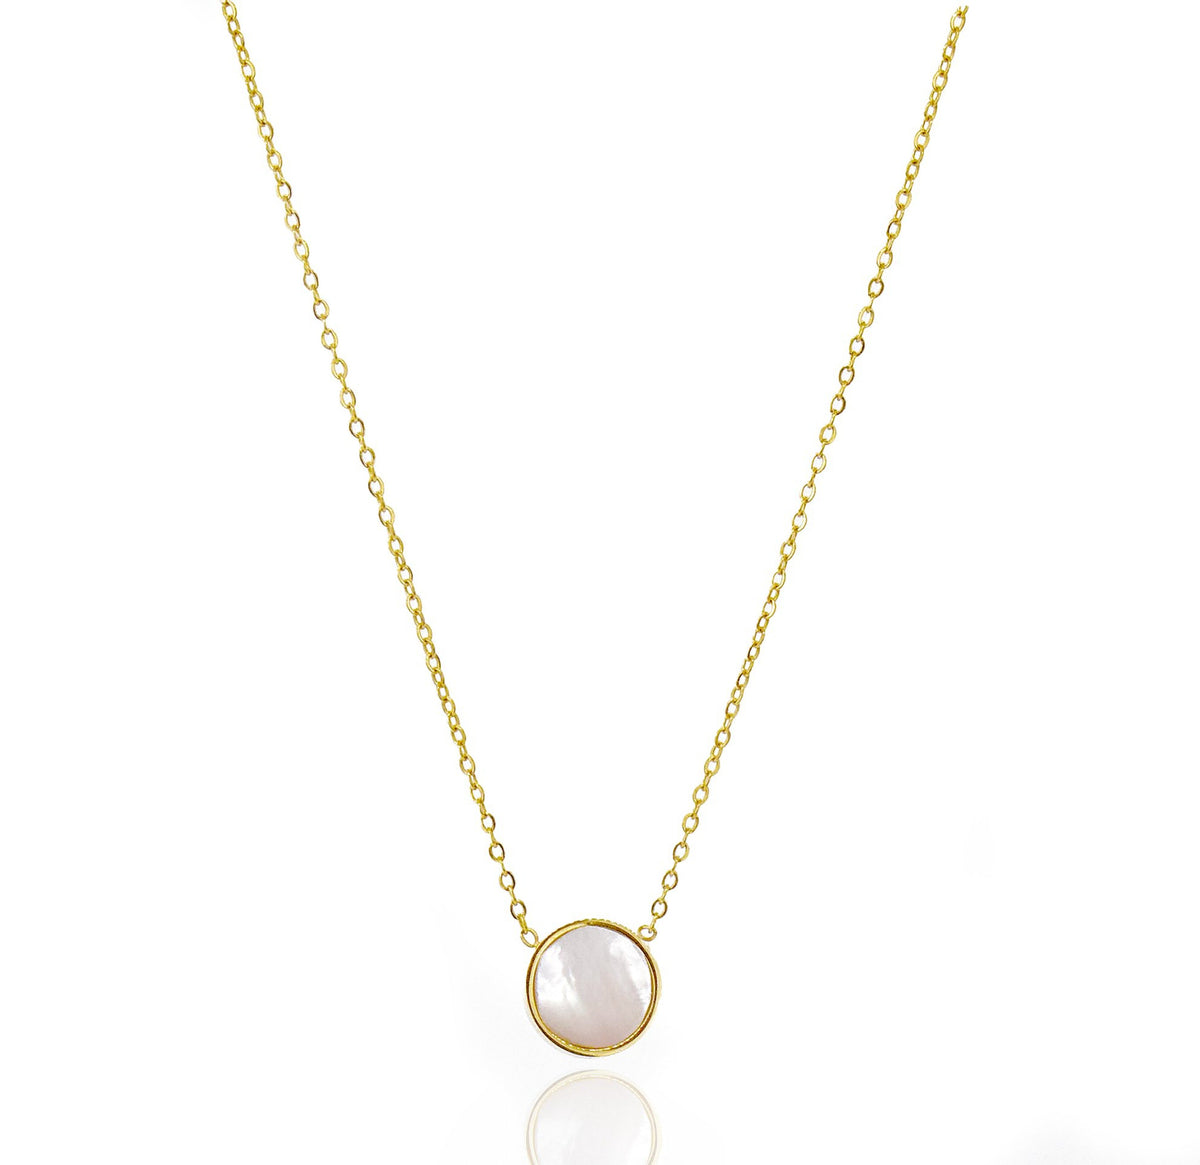 DAINTY PEARL DISC PENDANT NECKLACE